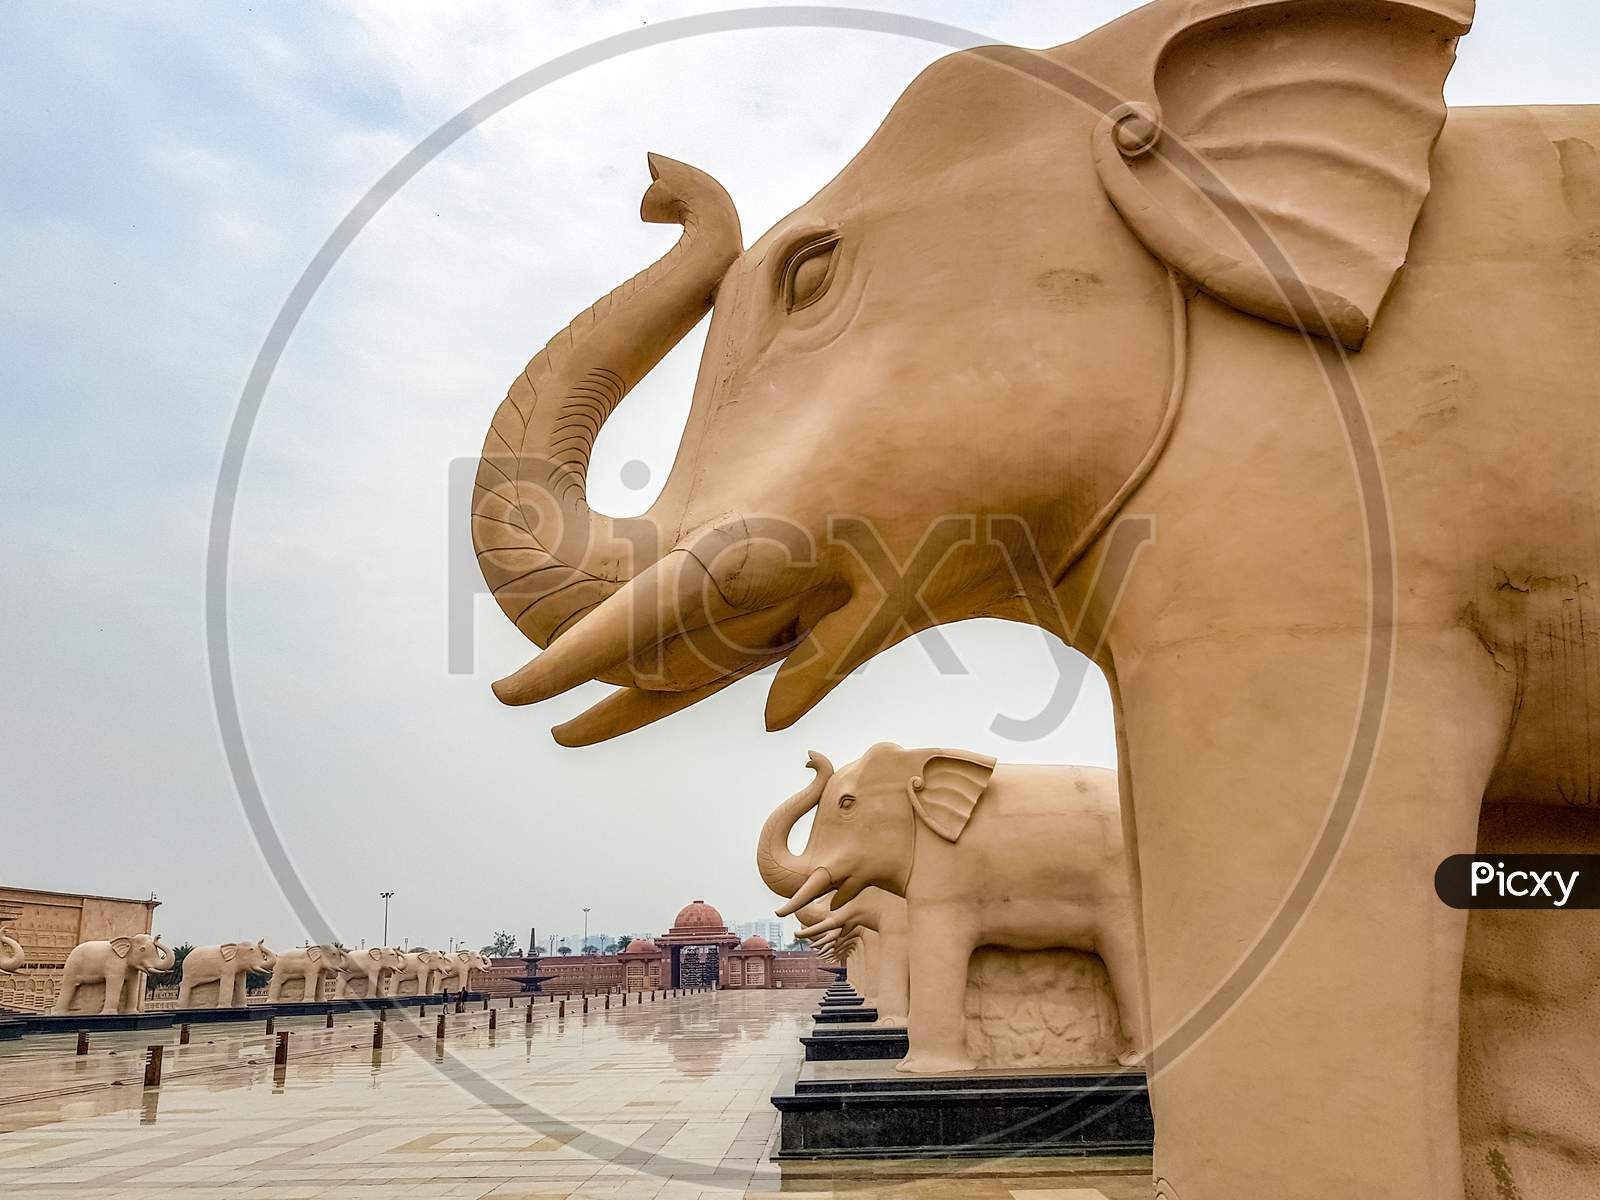 The Elephant Stone Statues Of Ambedkar Memorial Park At Lucknow. This Is A Popular Tourist Attraction